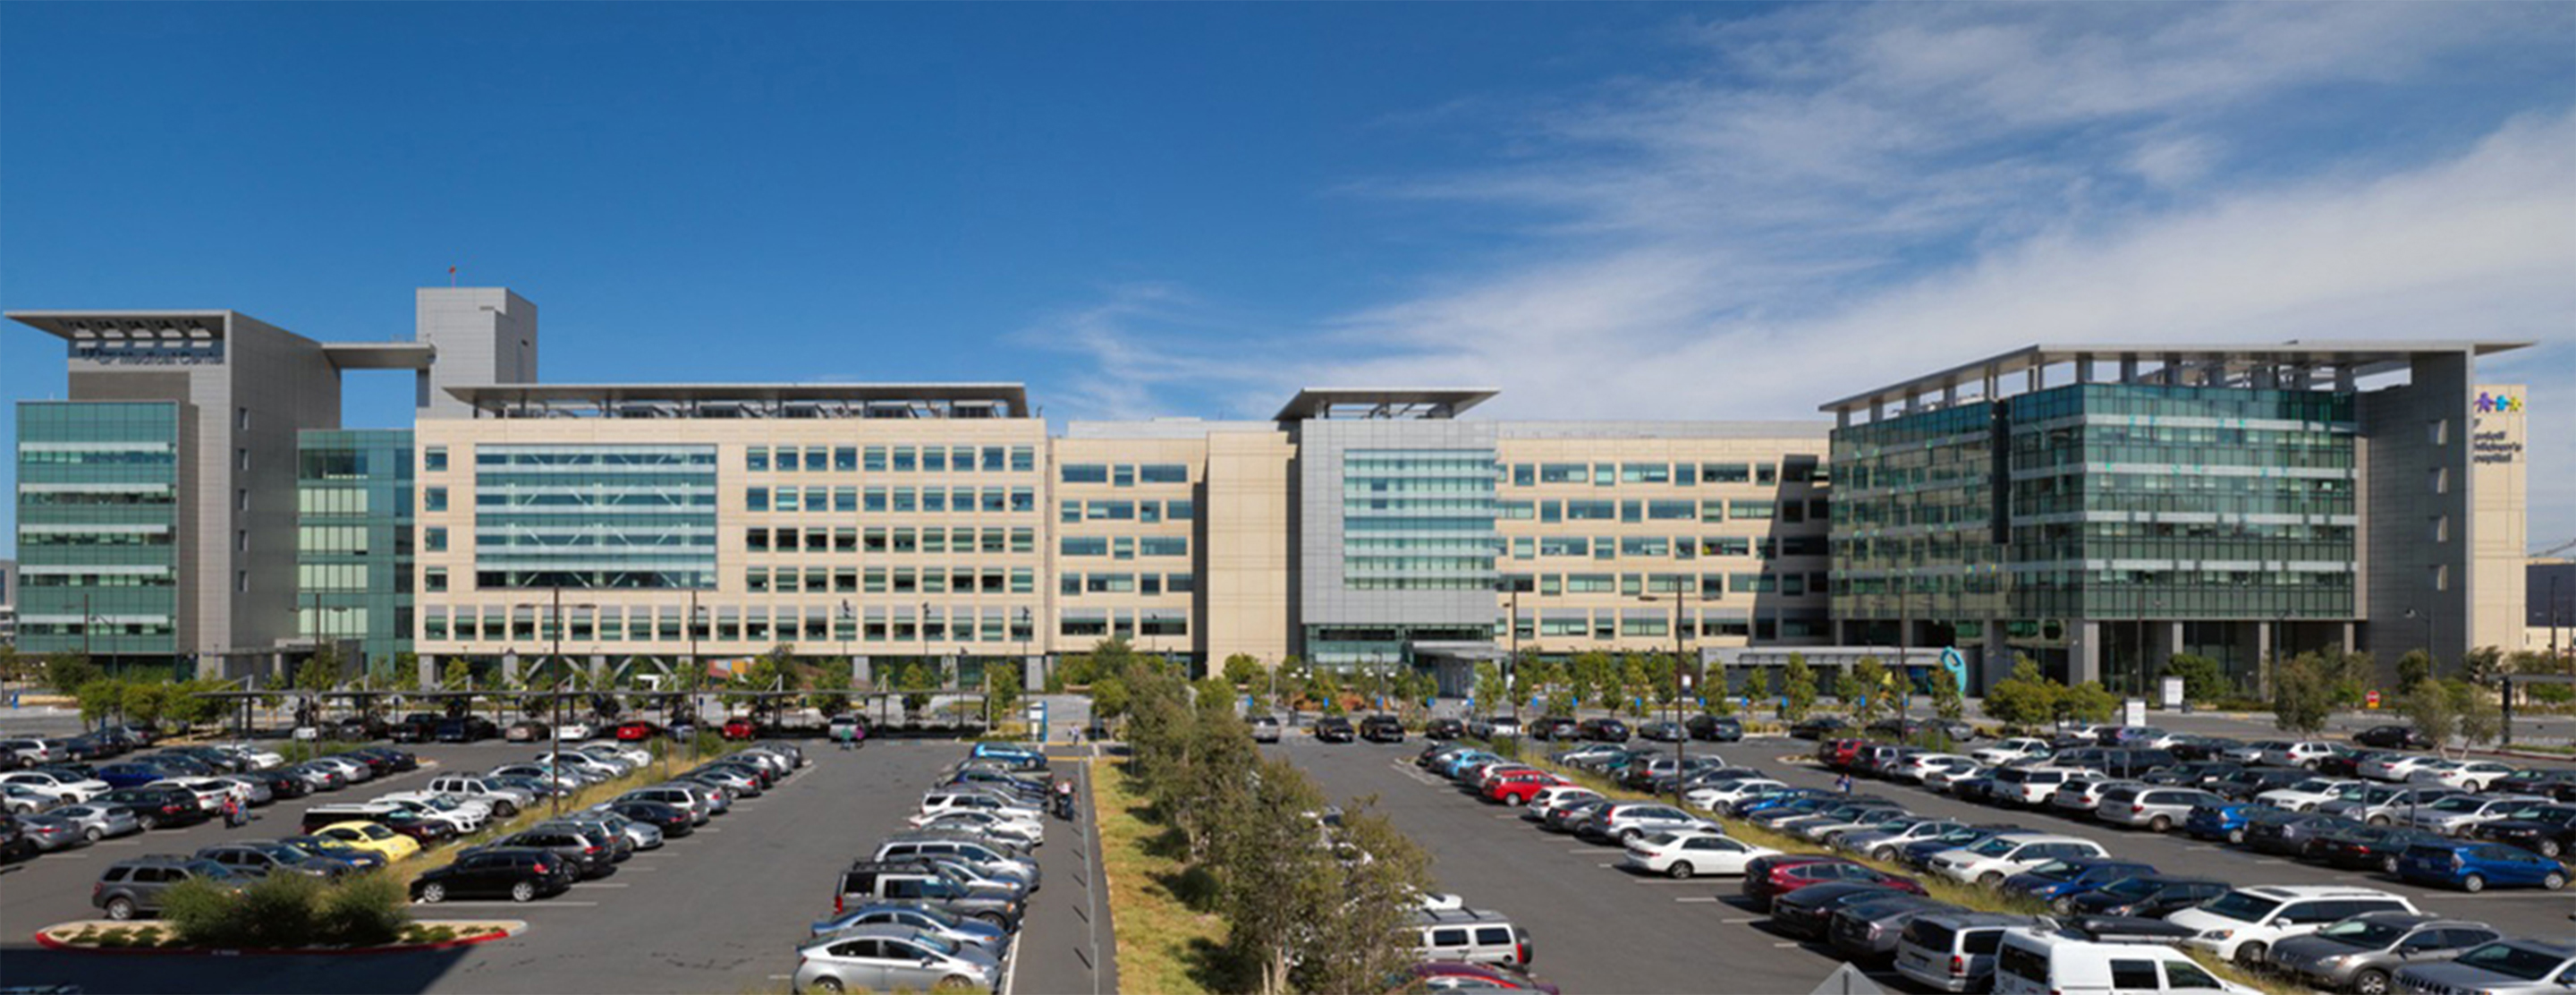 Mission Bay campus buildings and parking lot